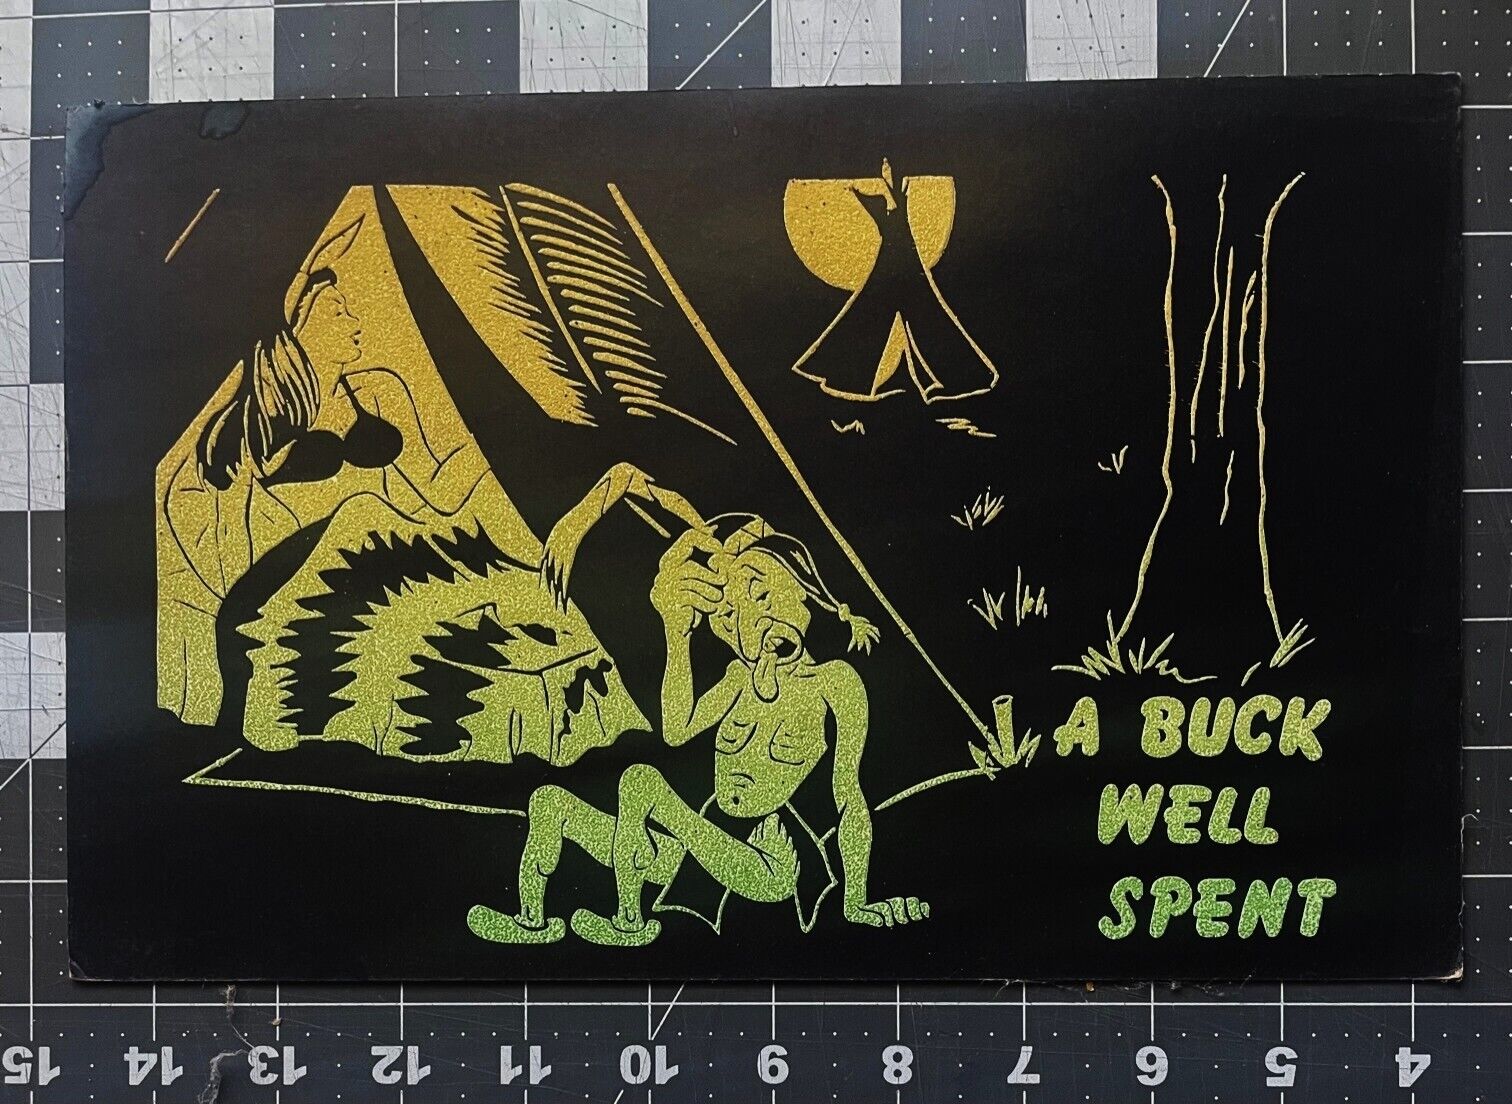 Vintage 1950s - A Buck Well Spent - Humorous Board Sign